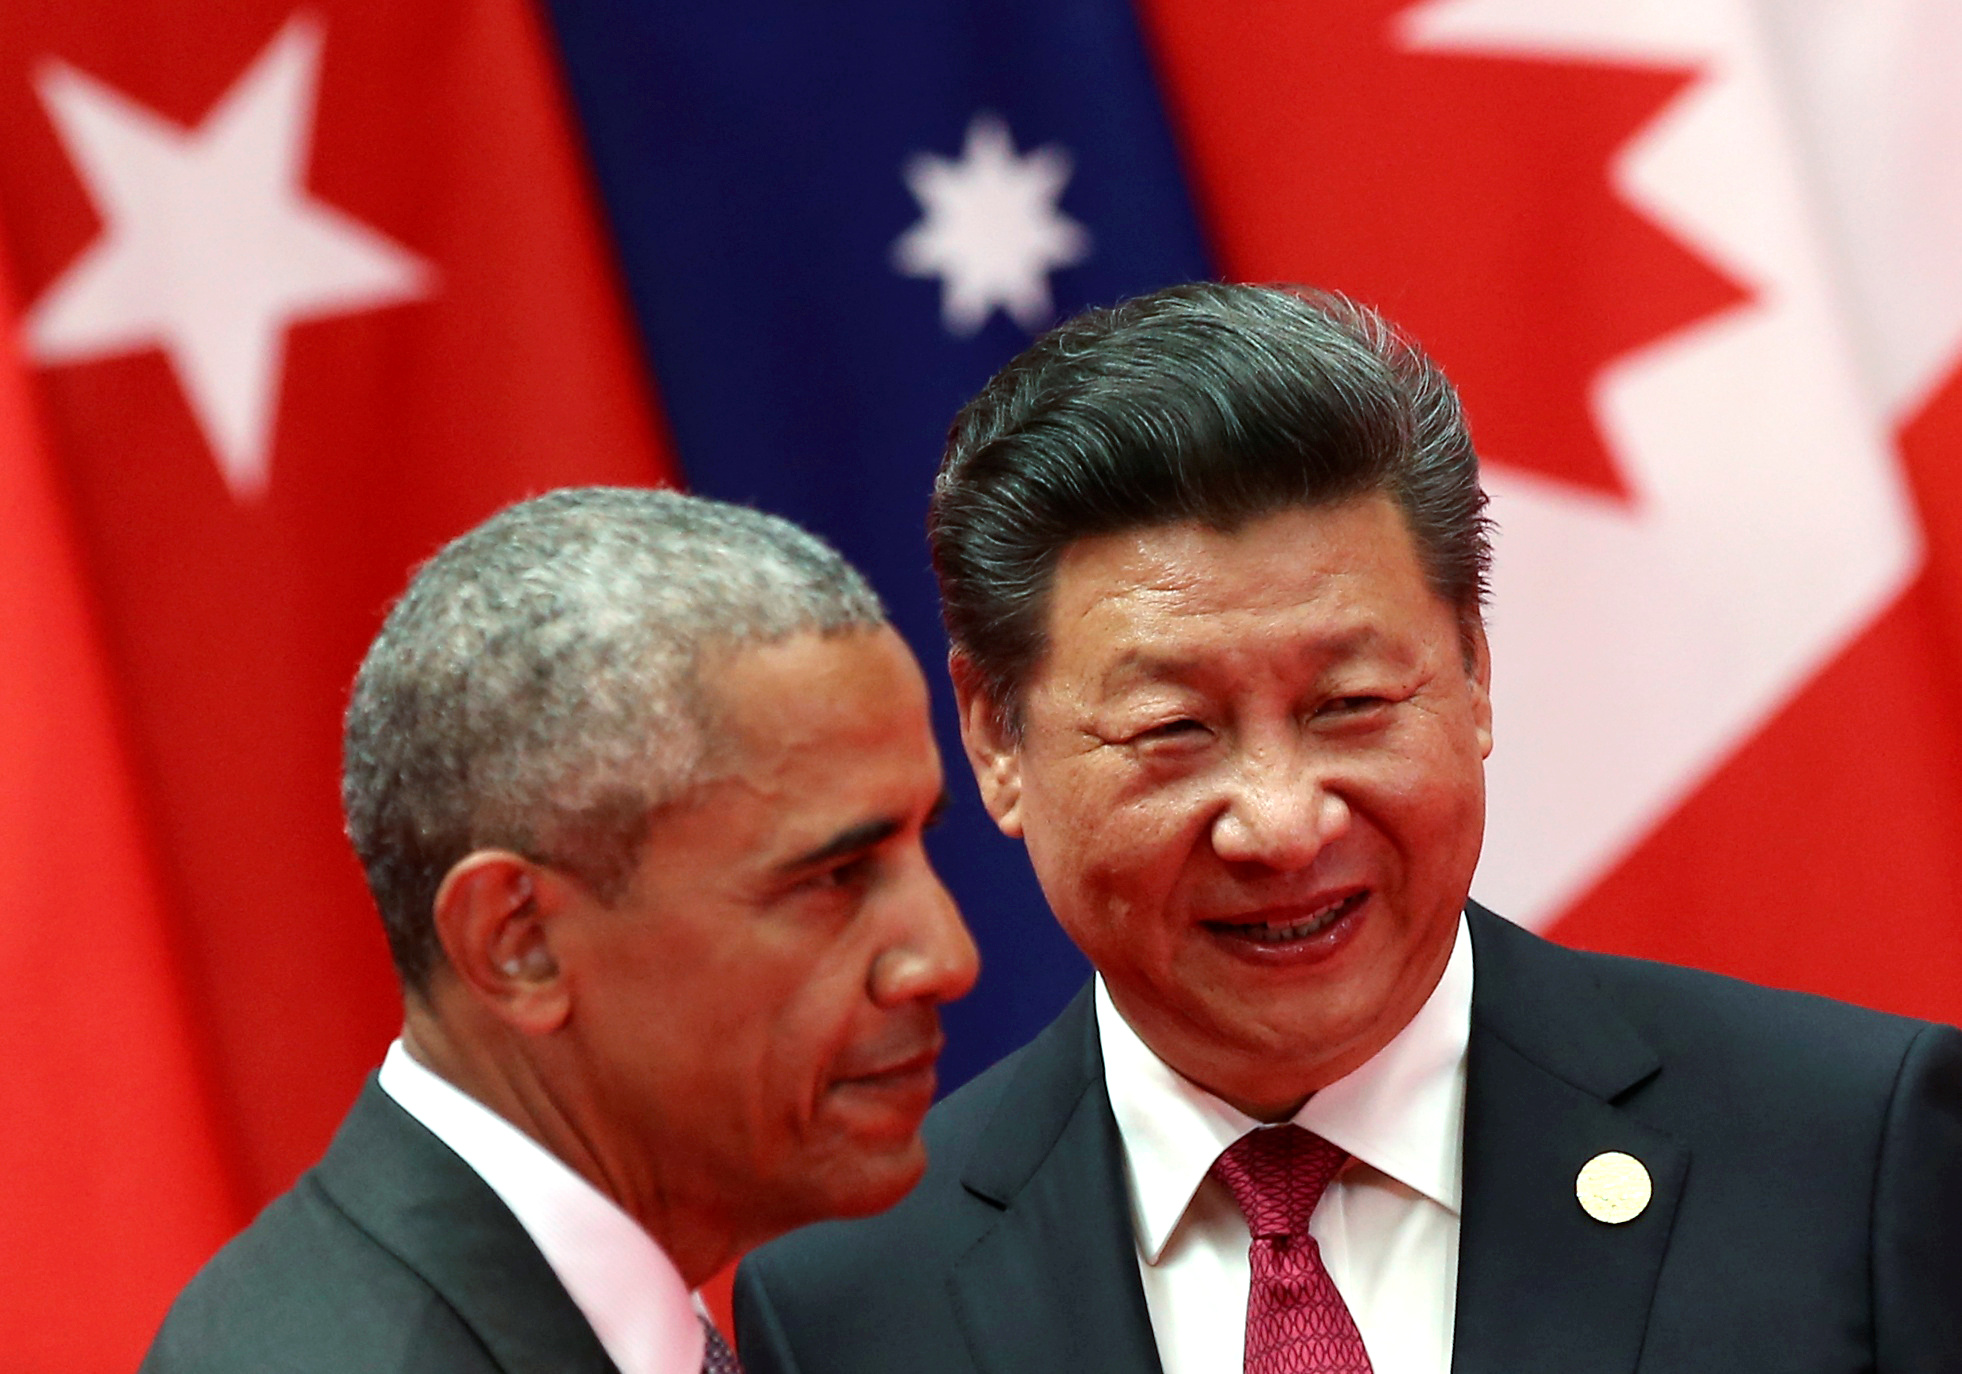 Chinese President Xi Jinping, right, and U.S. President Barack Obama attend the G-20 summit in Hangzhou, China, on Sept. 4, 2016 (Damir Sagolj—Reuters)